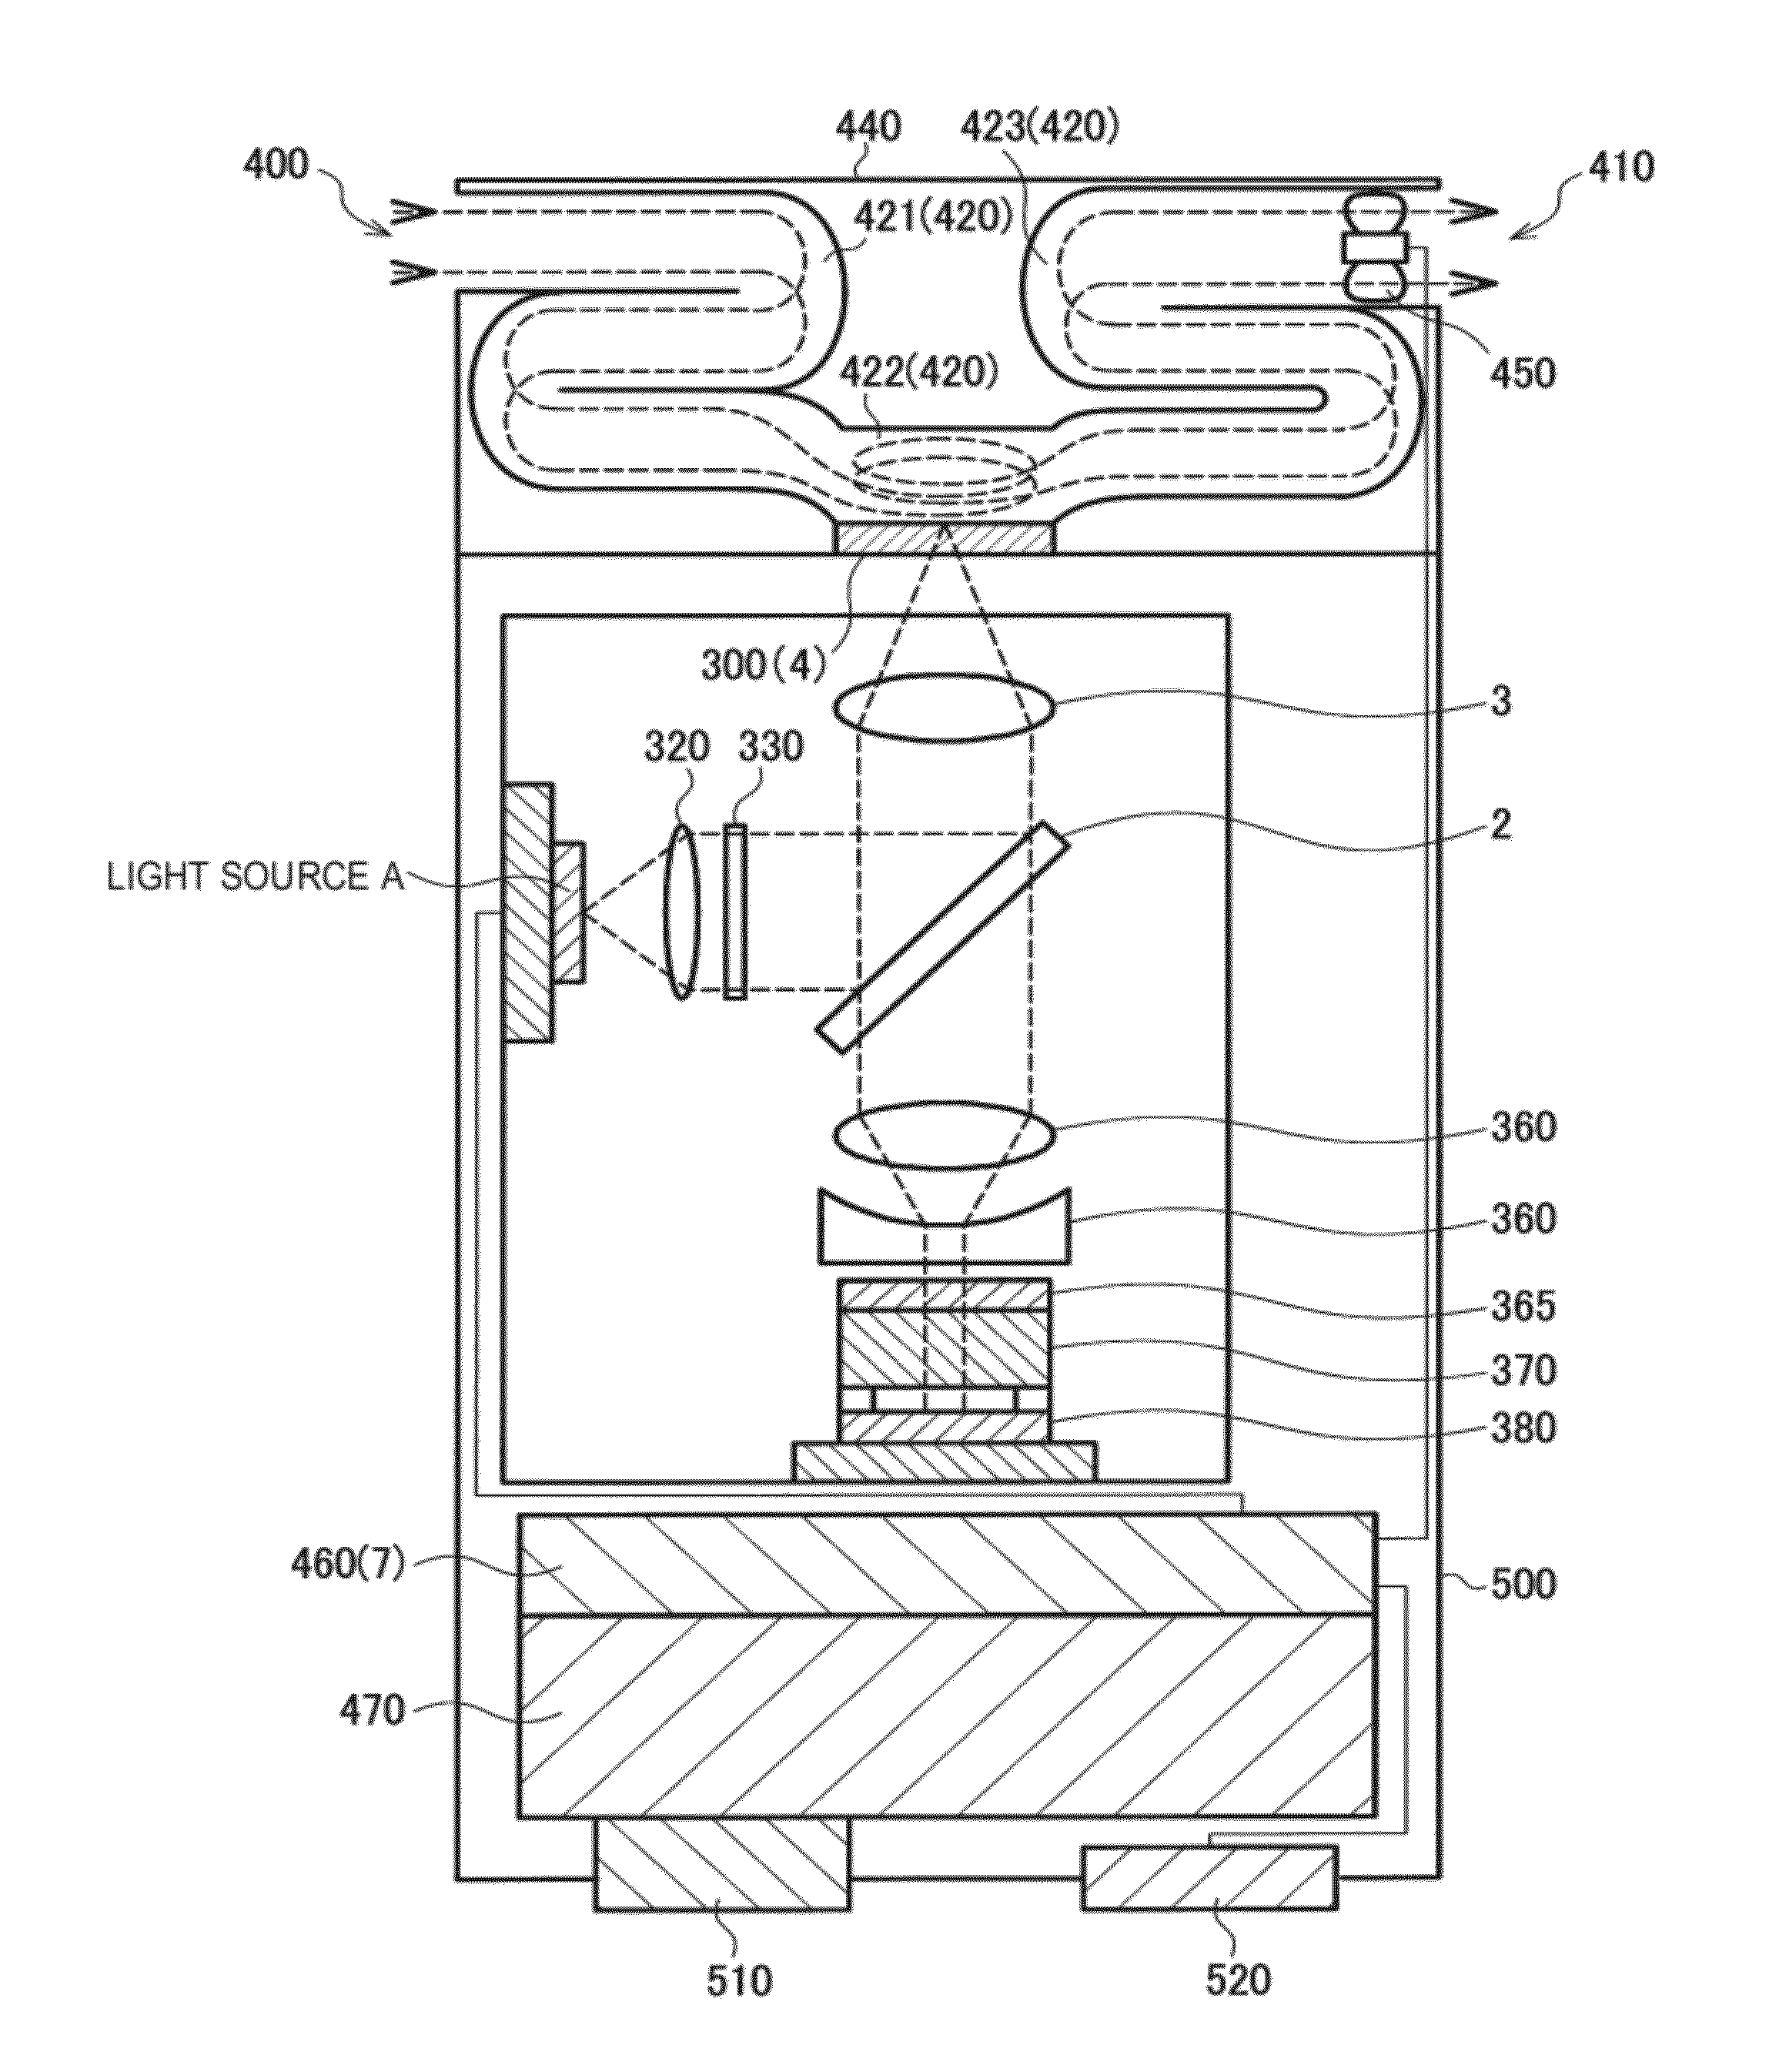 Optical device unit and detection apparatus